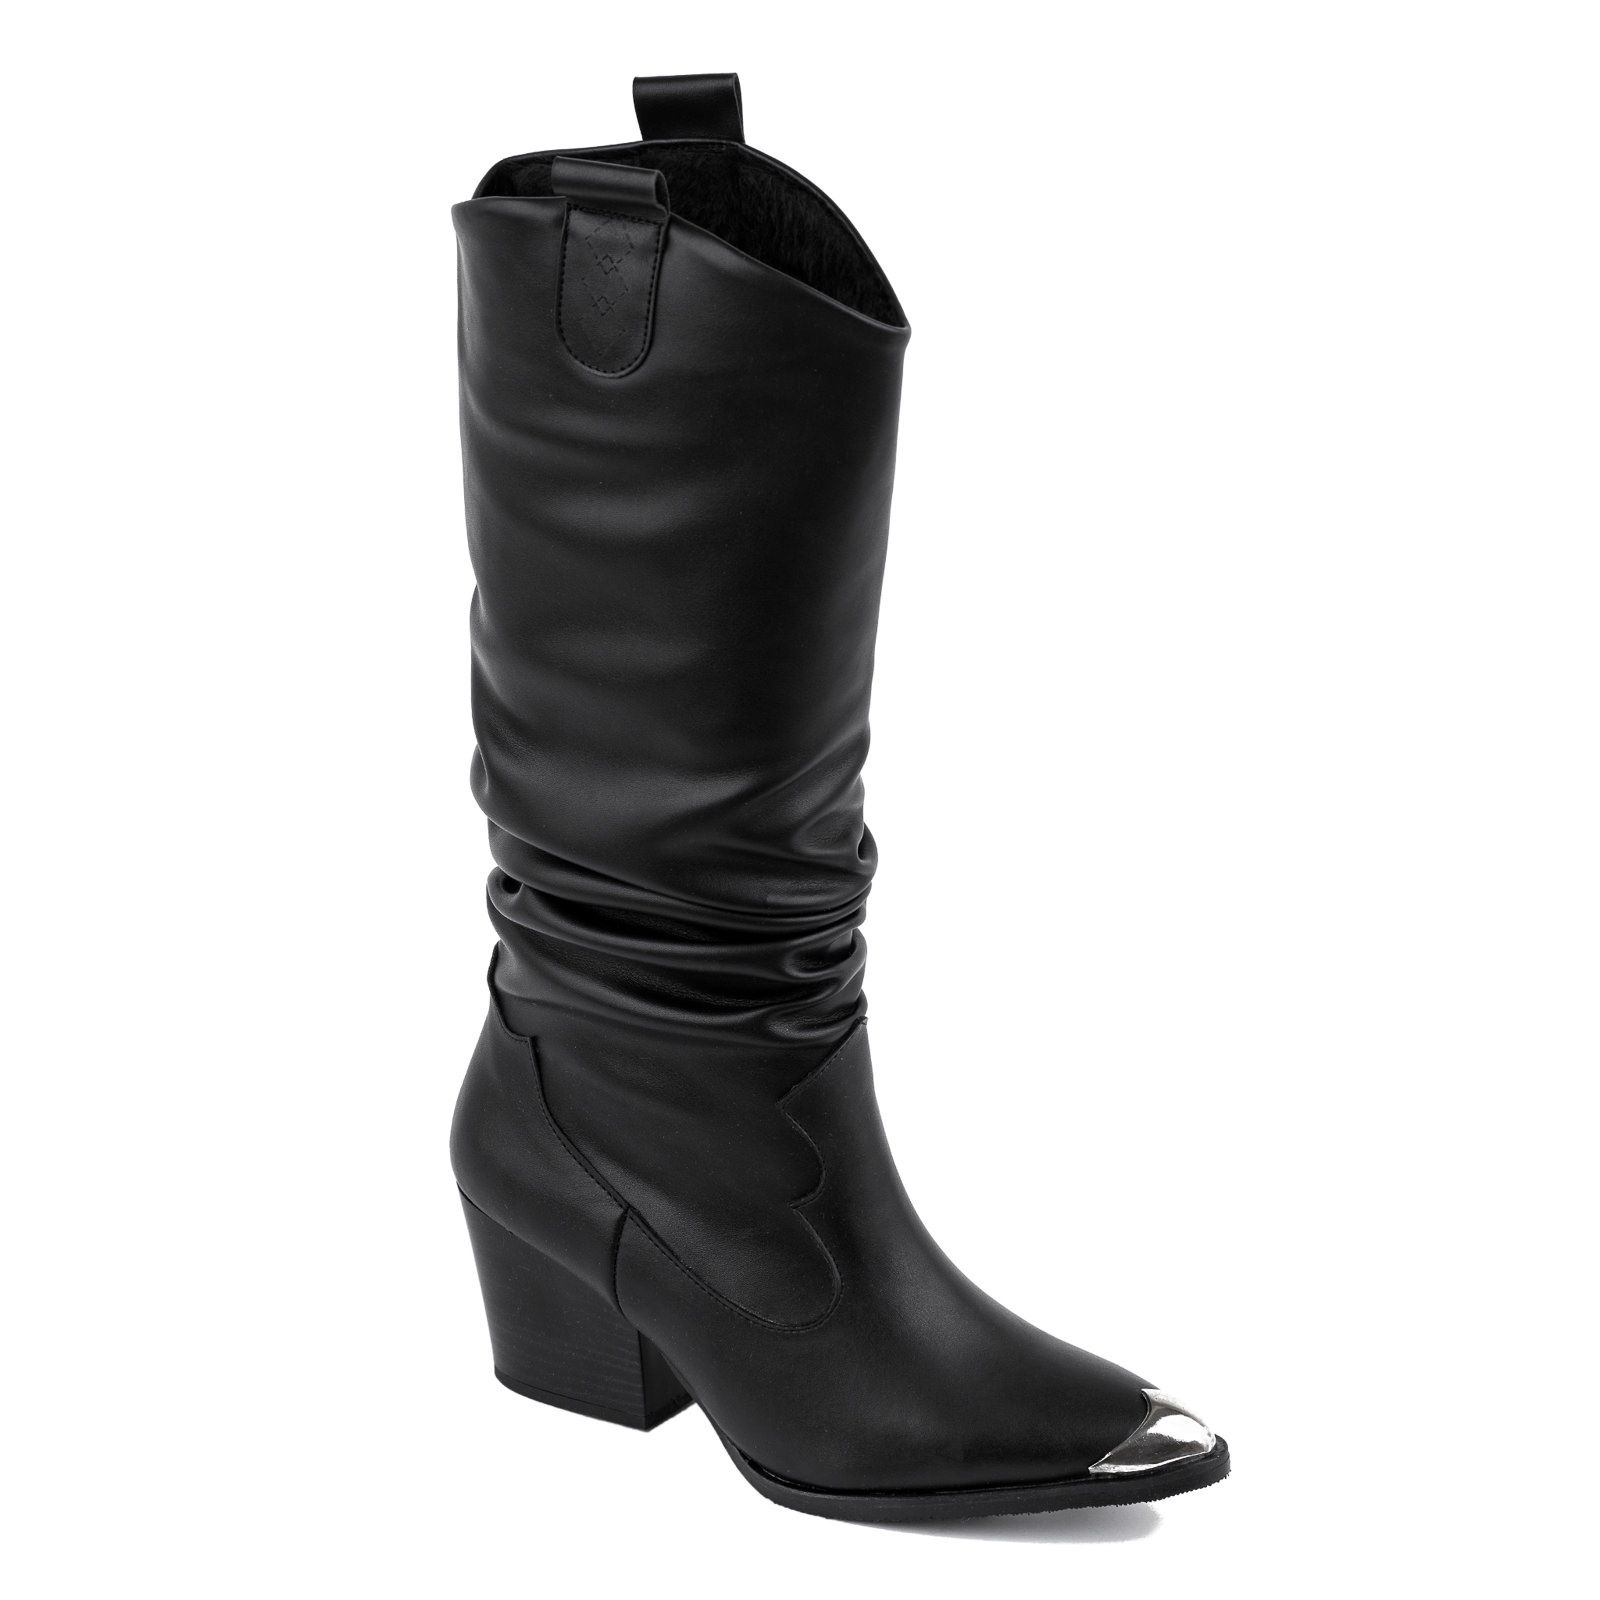 POINTED WRINKLED HIGH COWGIRL BOOTS WITH BLOCK HEEL - BLACK